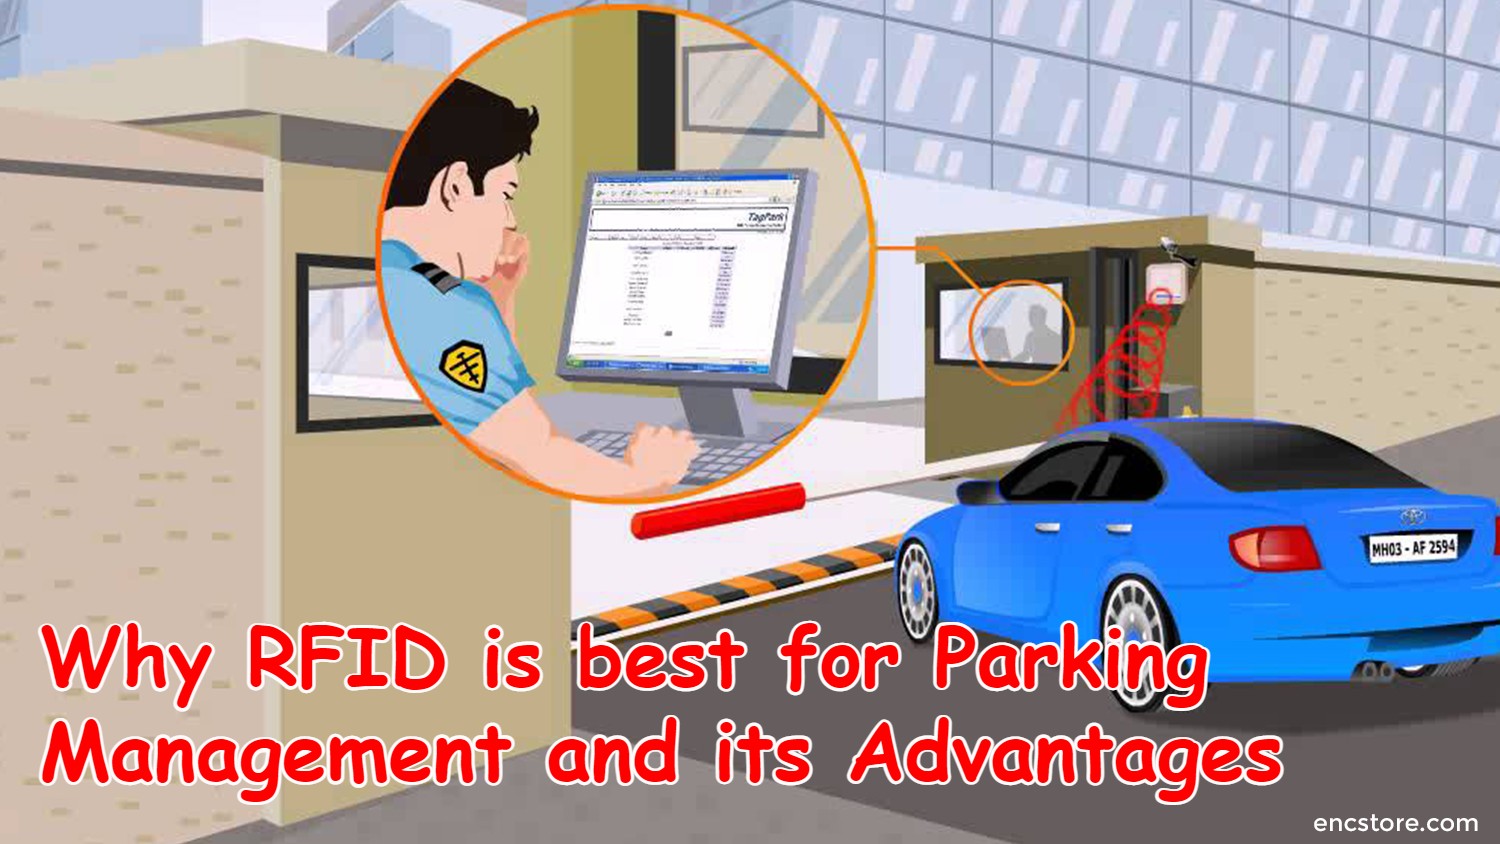 Why RFID is best for Parking Management and its Advantages